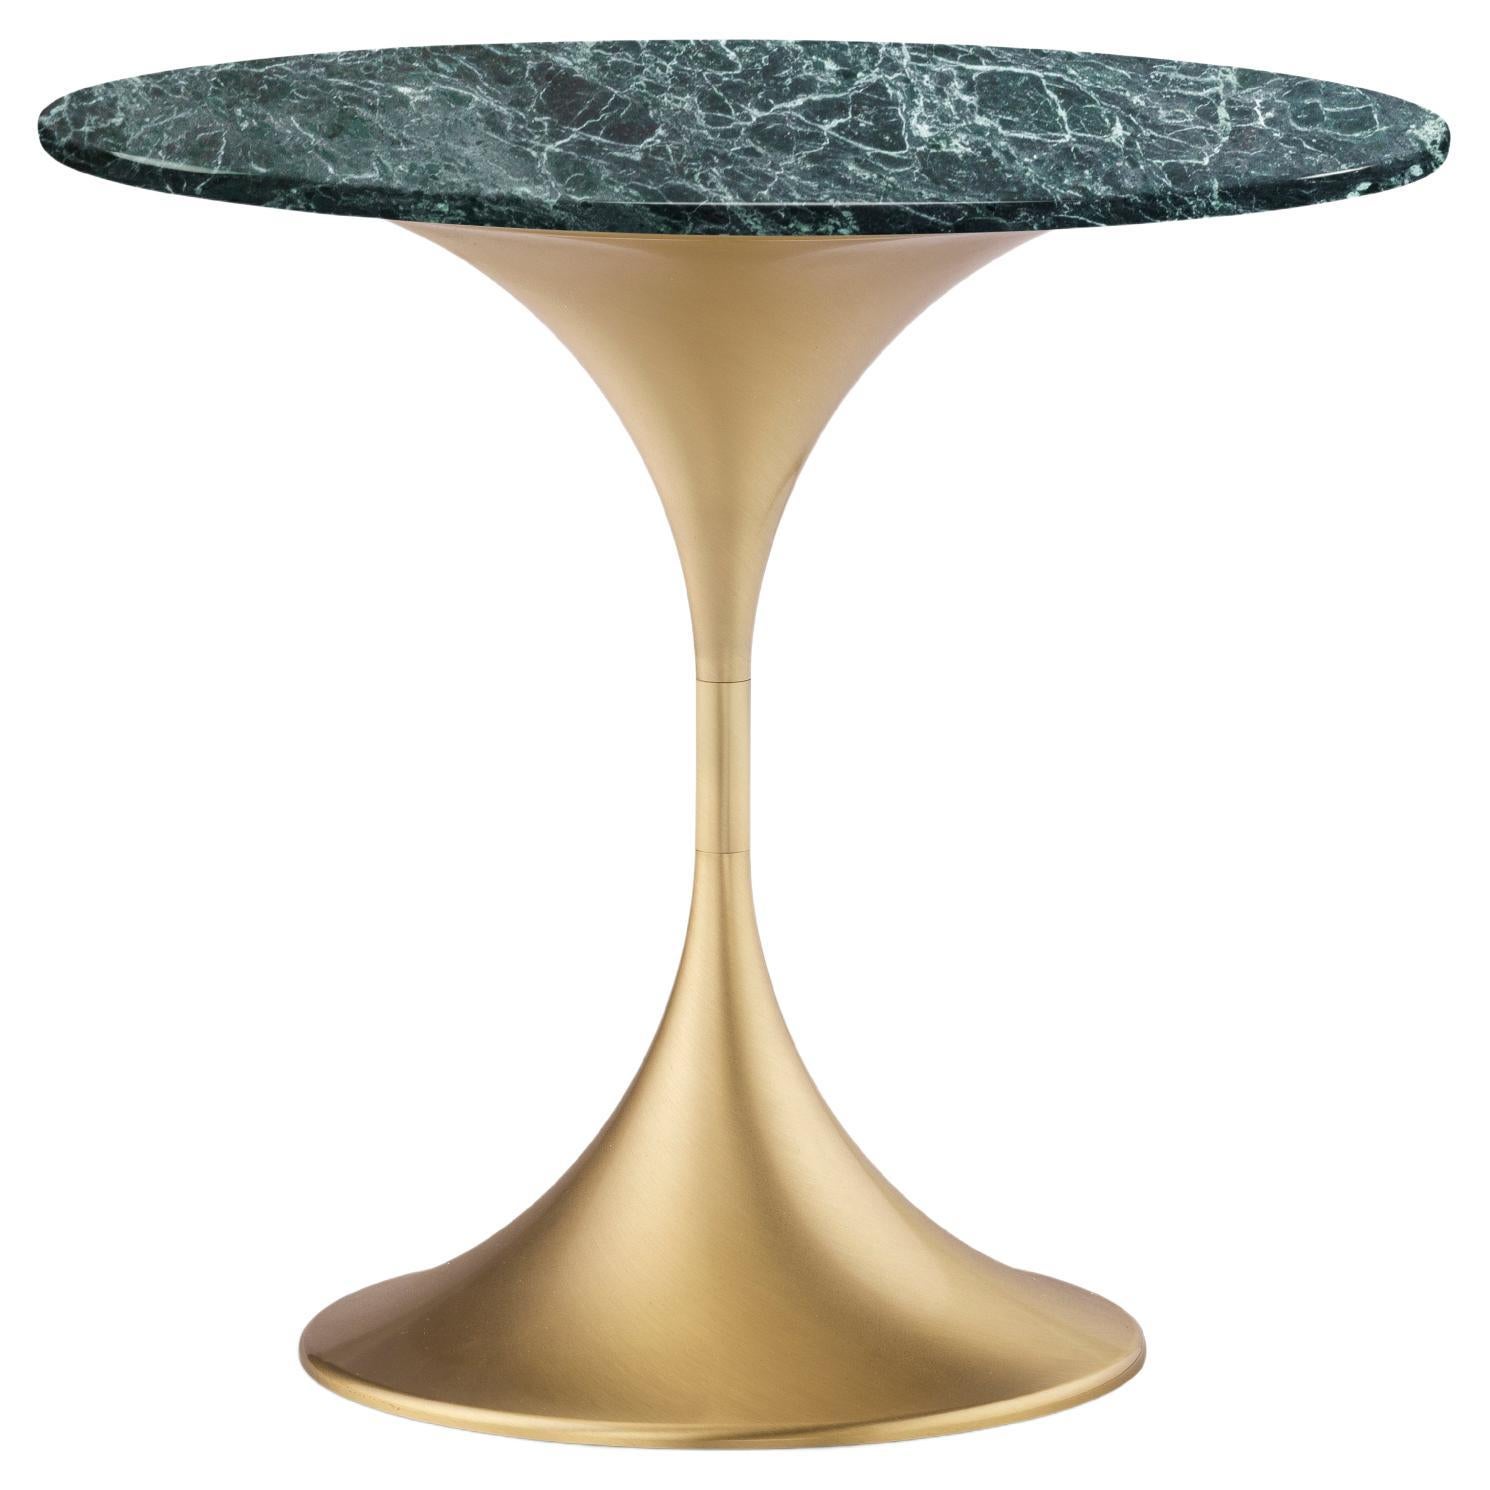 Table courte Dapertutto, plateau Verde Alpi, laiton satiné , Made in Italy